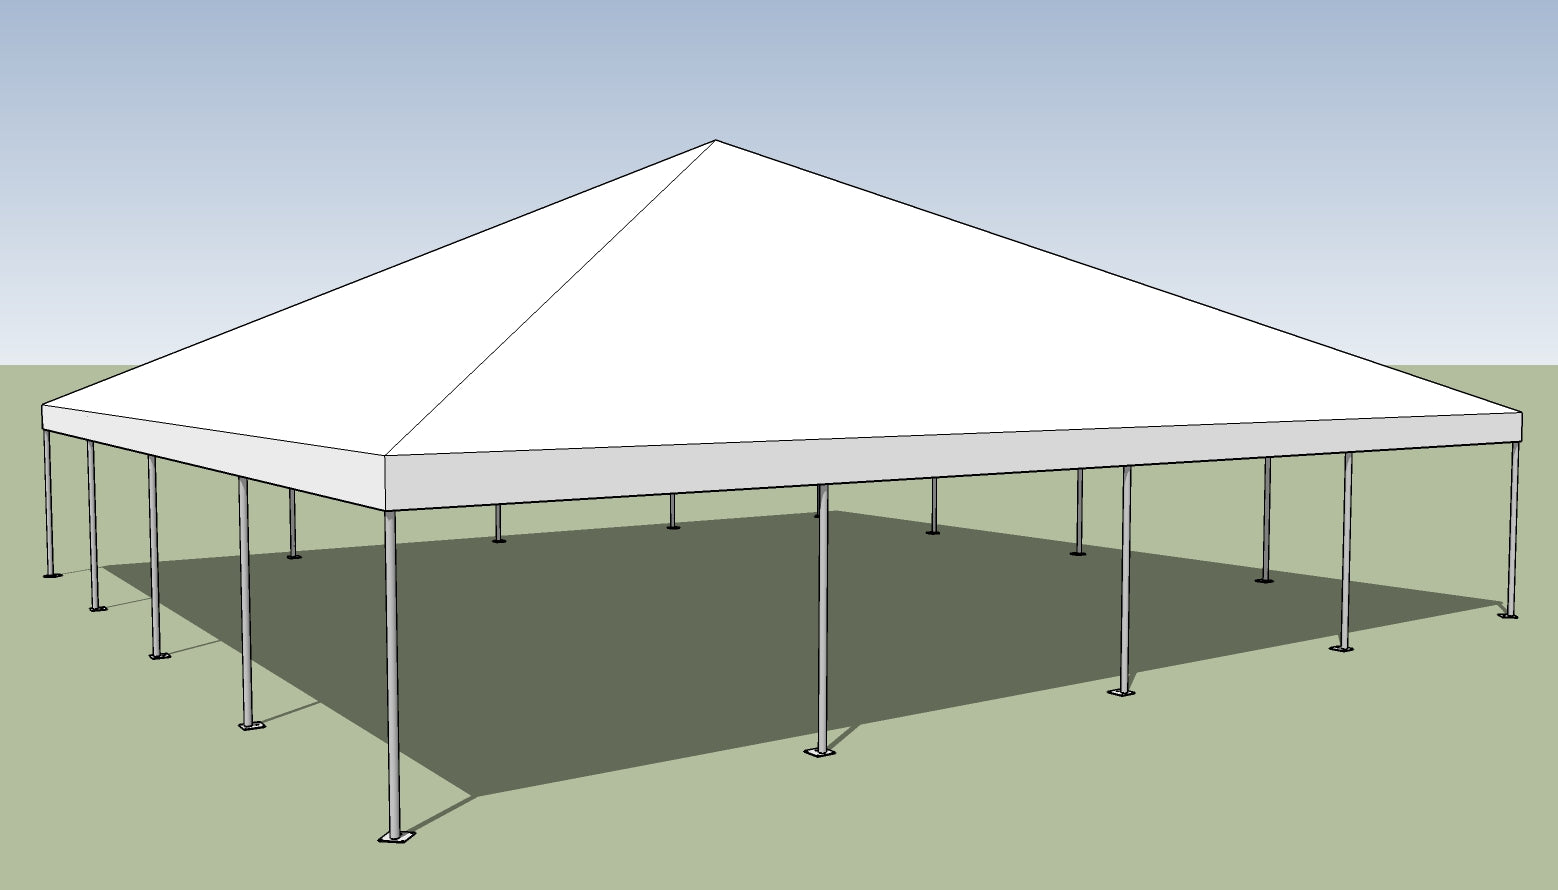 40 x 40 Commercial Frame Tent for Sale